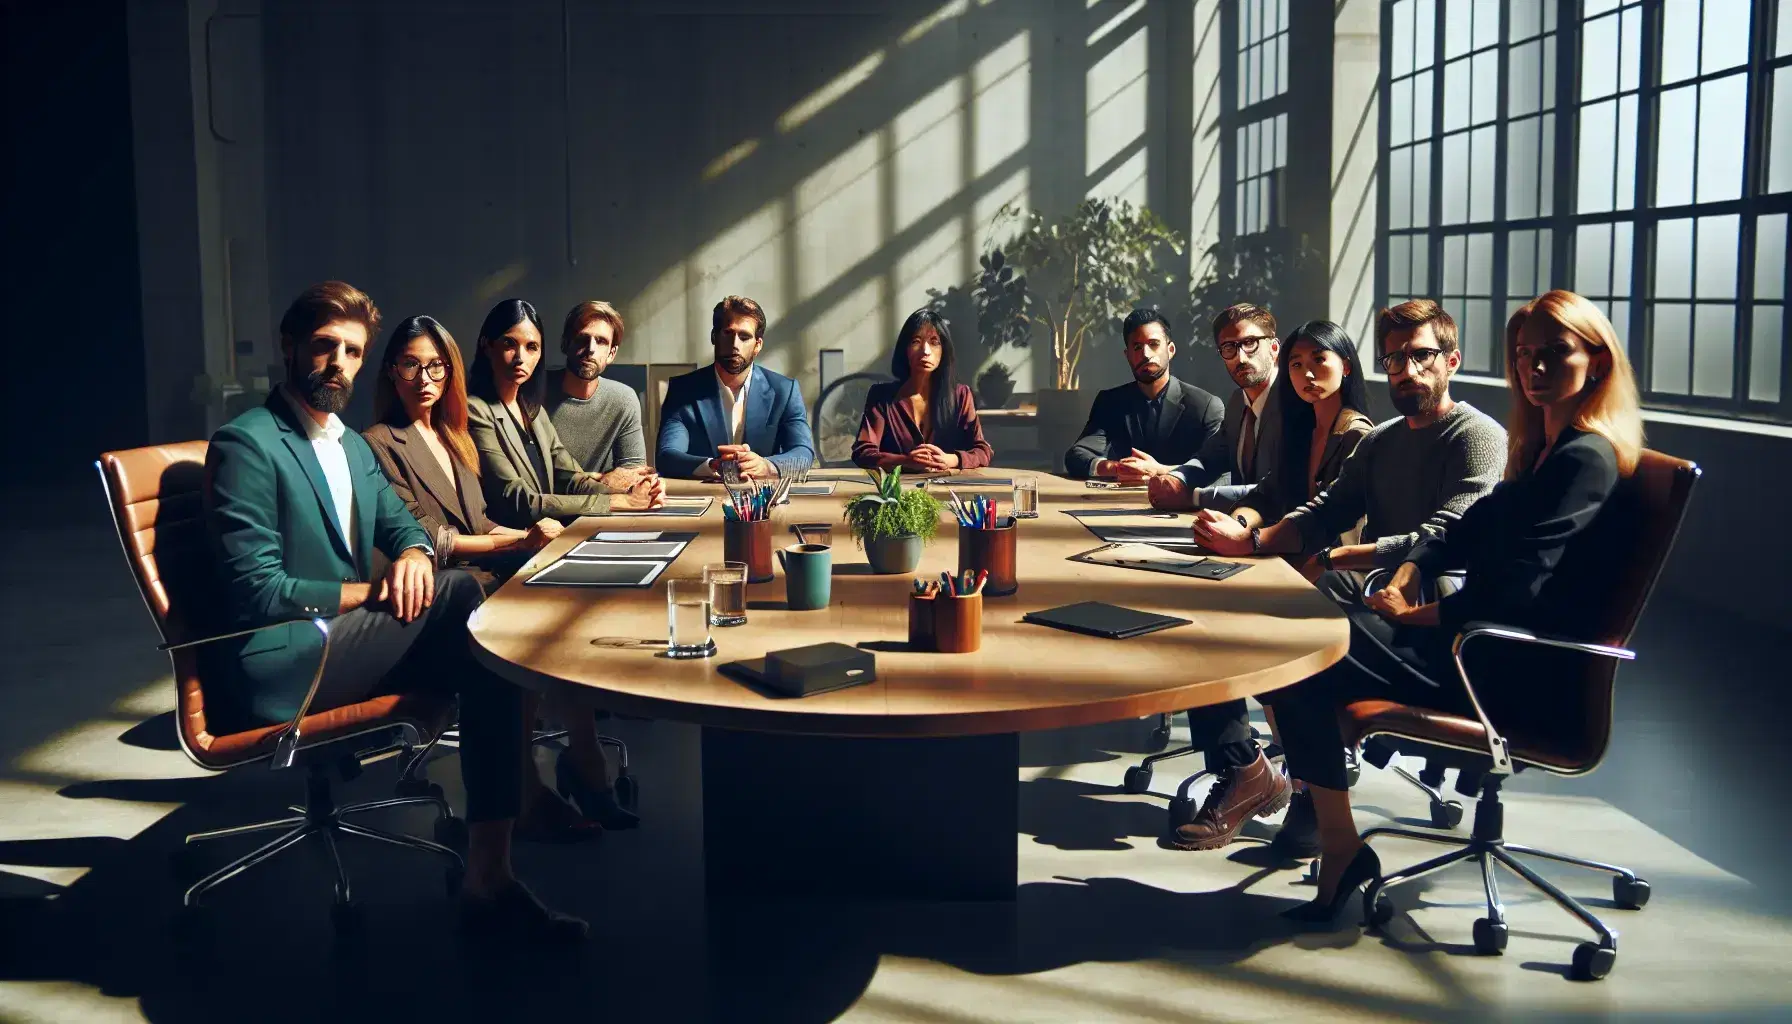 Eight diverse professionals engaged in a meeting around a large oval table in a well-lit modern office, with a plant and office supplies at the center.